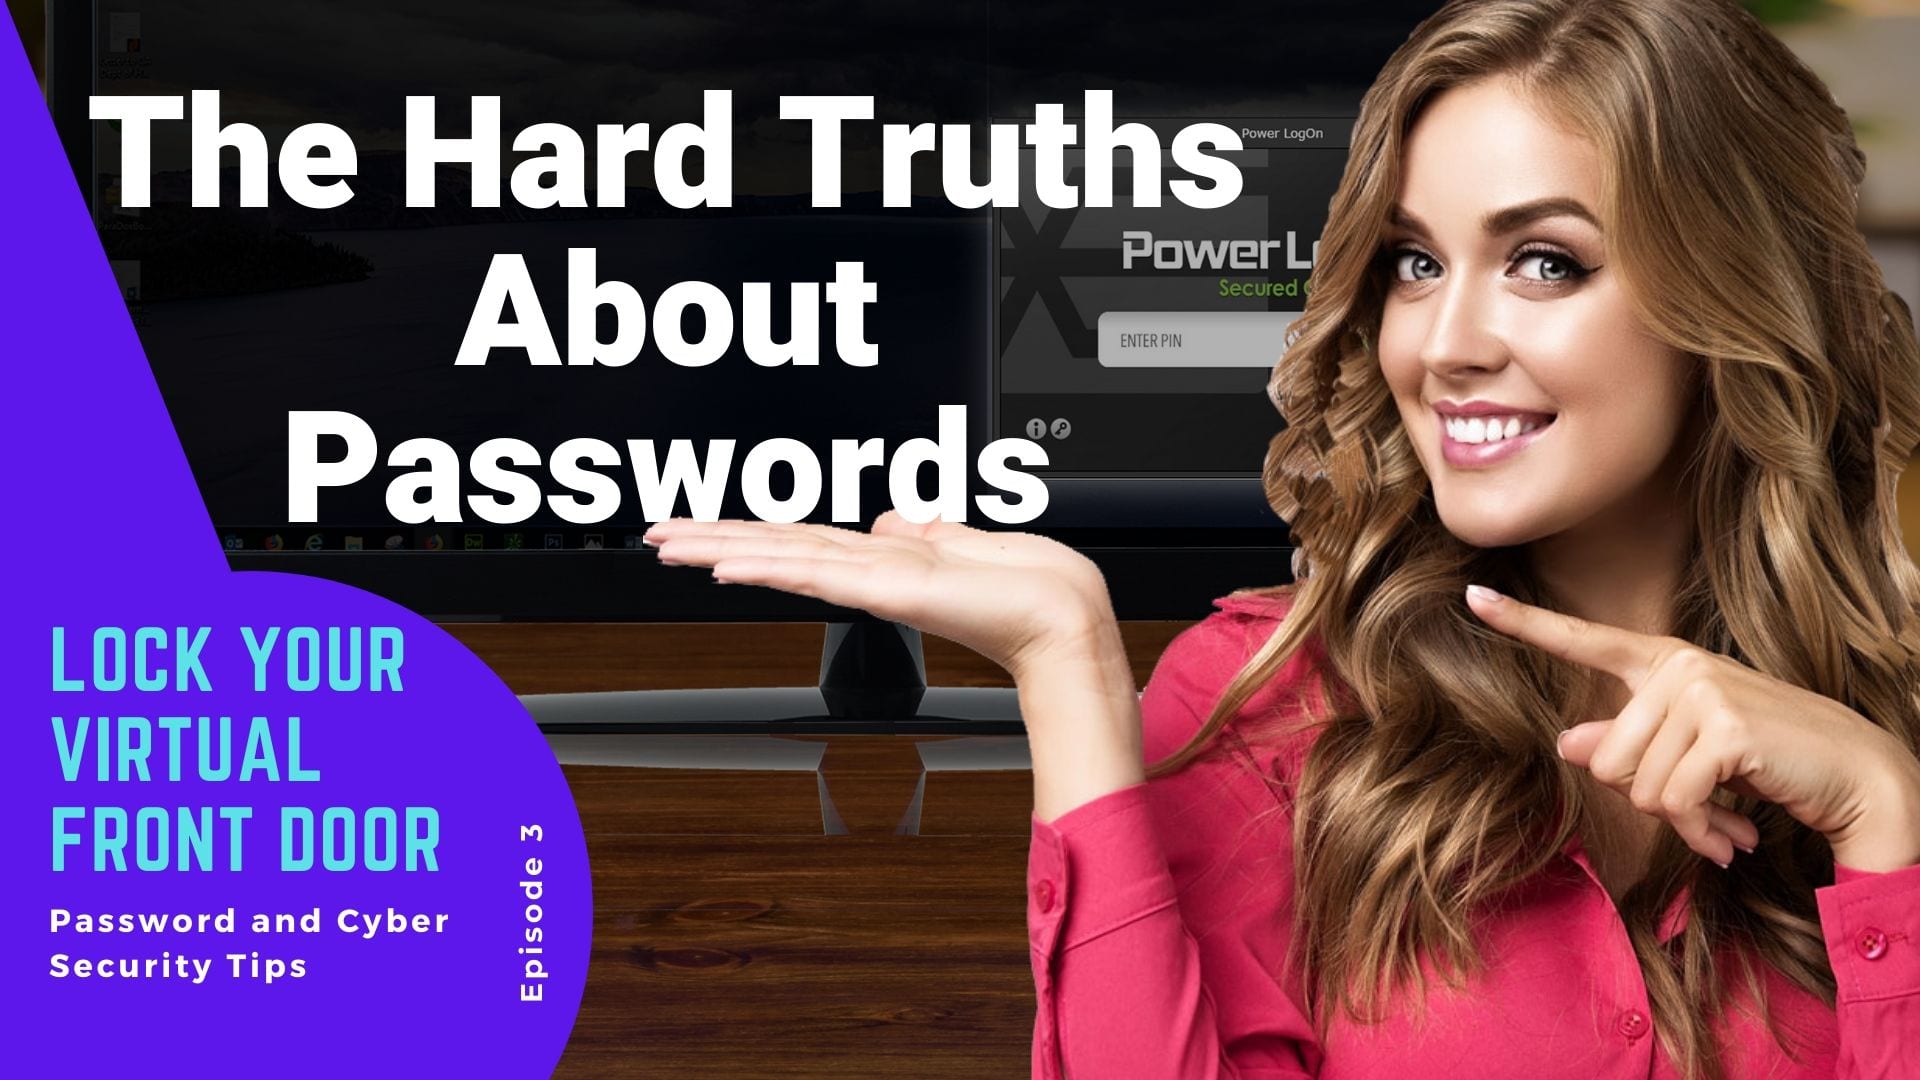 The third video of the cybersecurity tips series "Lock Your Virtual Front Door." The image shows a young woman with a friendly smile pointing to the title of this episode "The Hard Thruths about Passwords" with the expression of this is important.